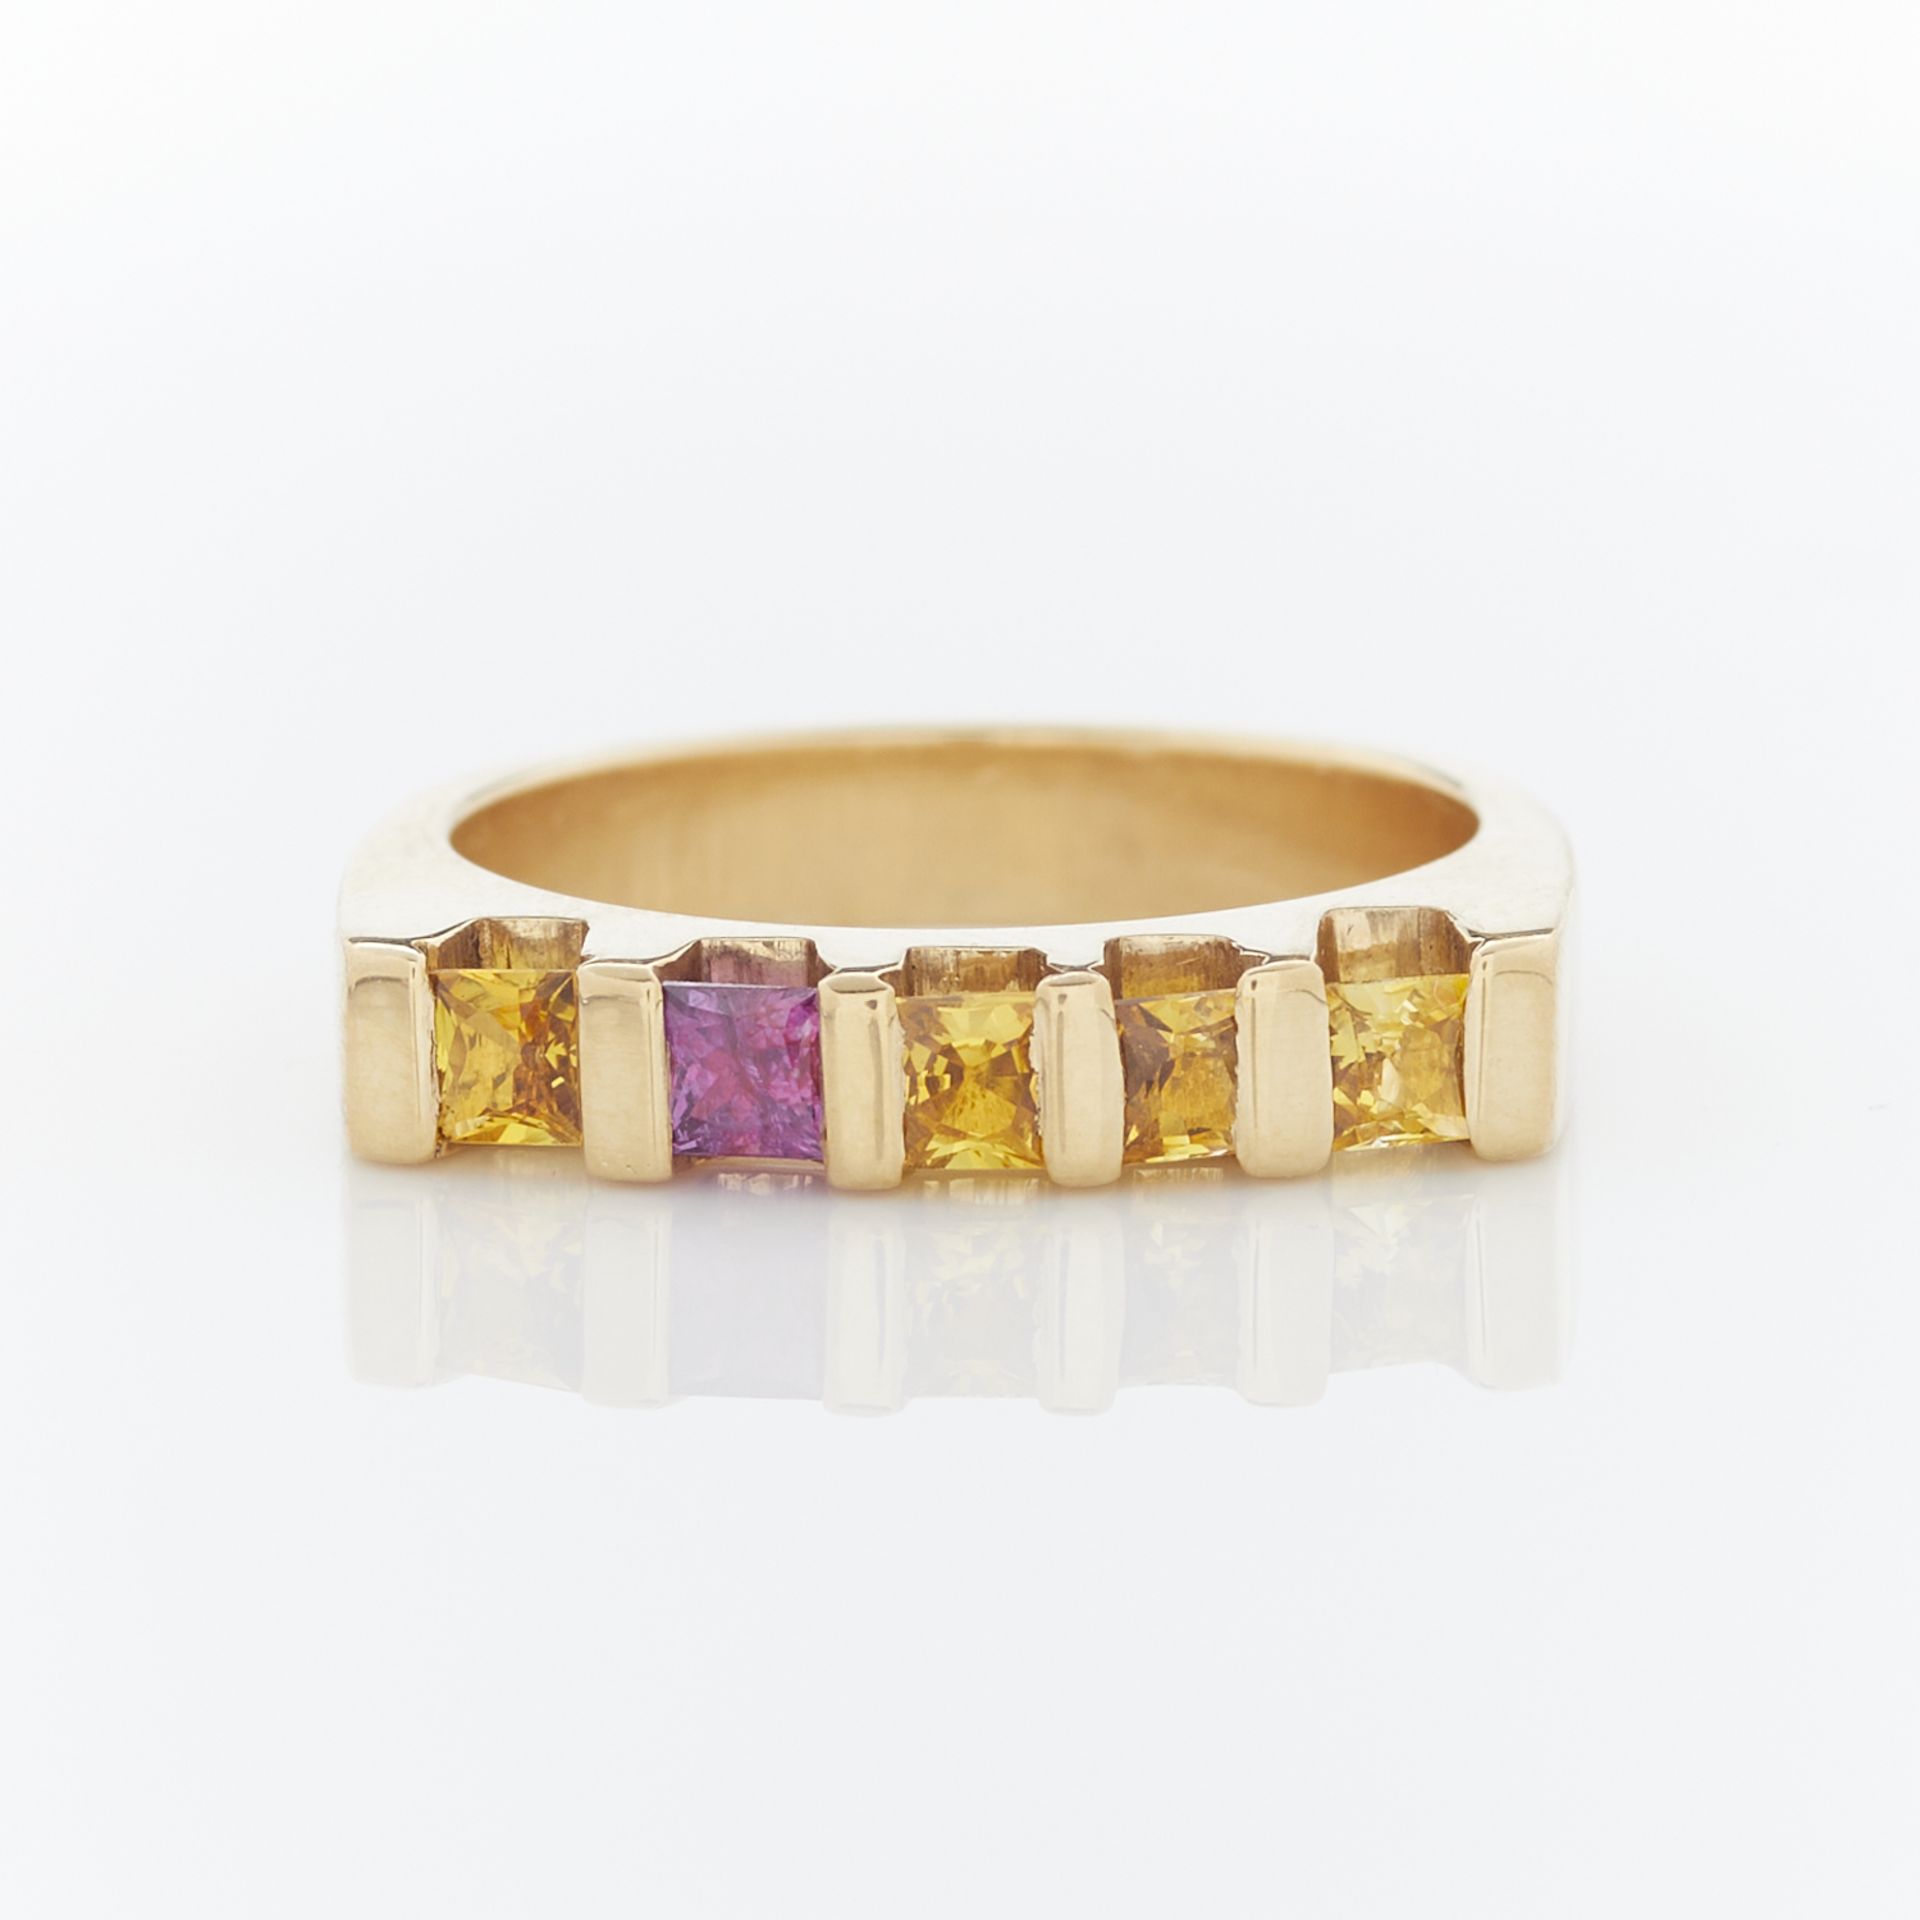 14k Yellow Gold & Sapphire Ring - Image 5 of 11